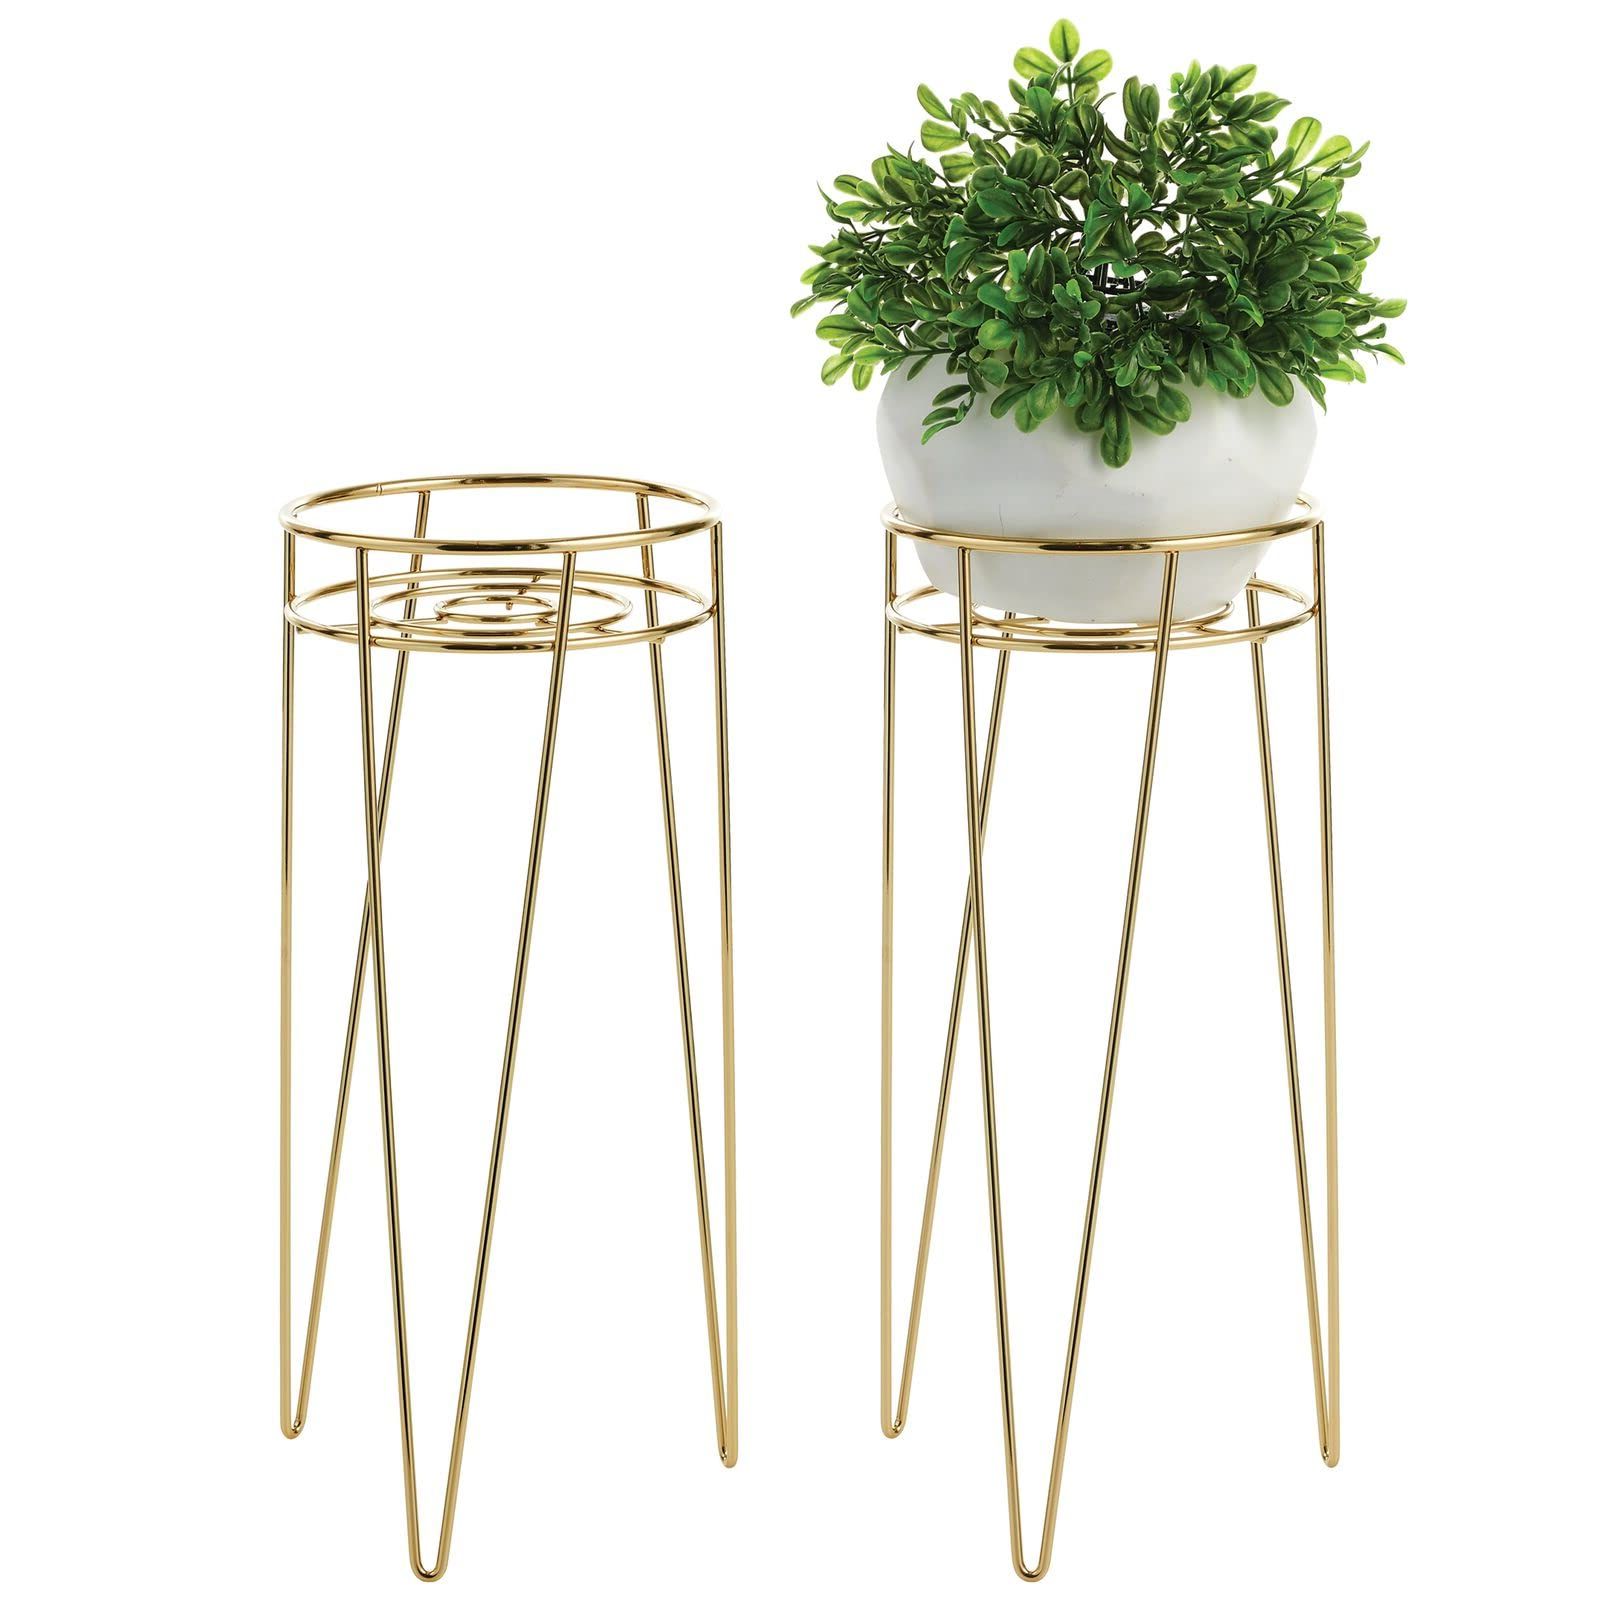 Brass Plant Stands With Most Recently Released Mdesign Steel Modern 17" Plant Stand Holder With Hairpin Legs – Display  Indoor/outdoor Plants, Flowers, Succulents On Shelf, Balcony, Patio,  Garden, Office, Concerto Collection, 2 Pack, Soft Brass (View 2 of 10)